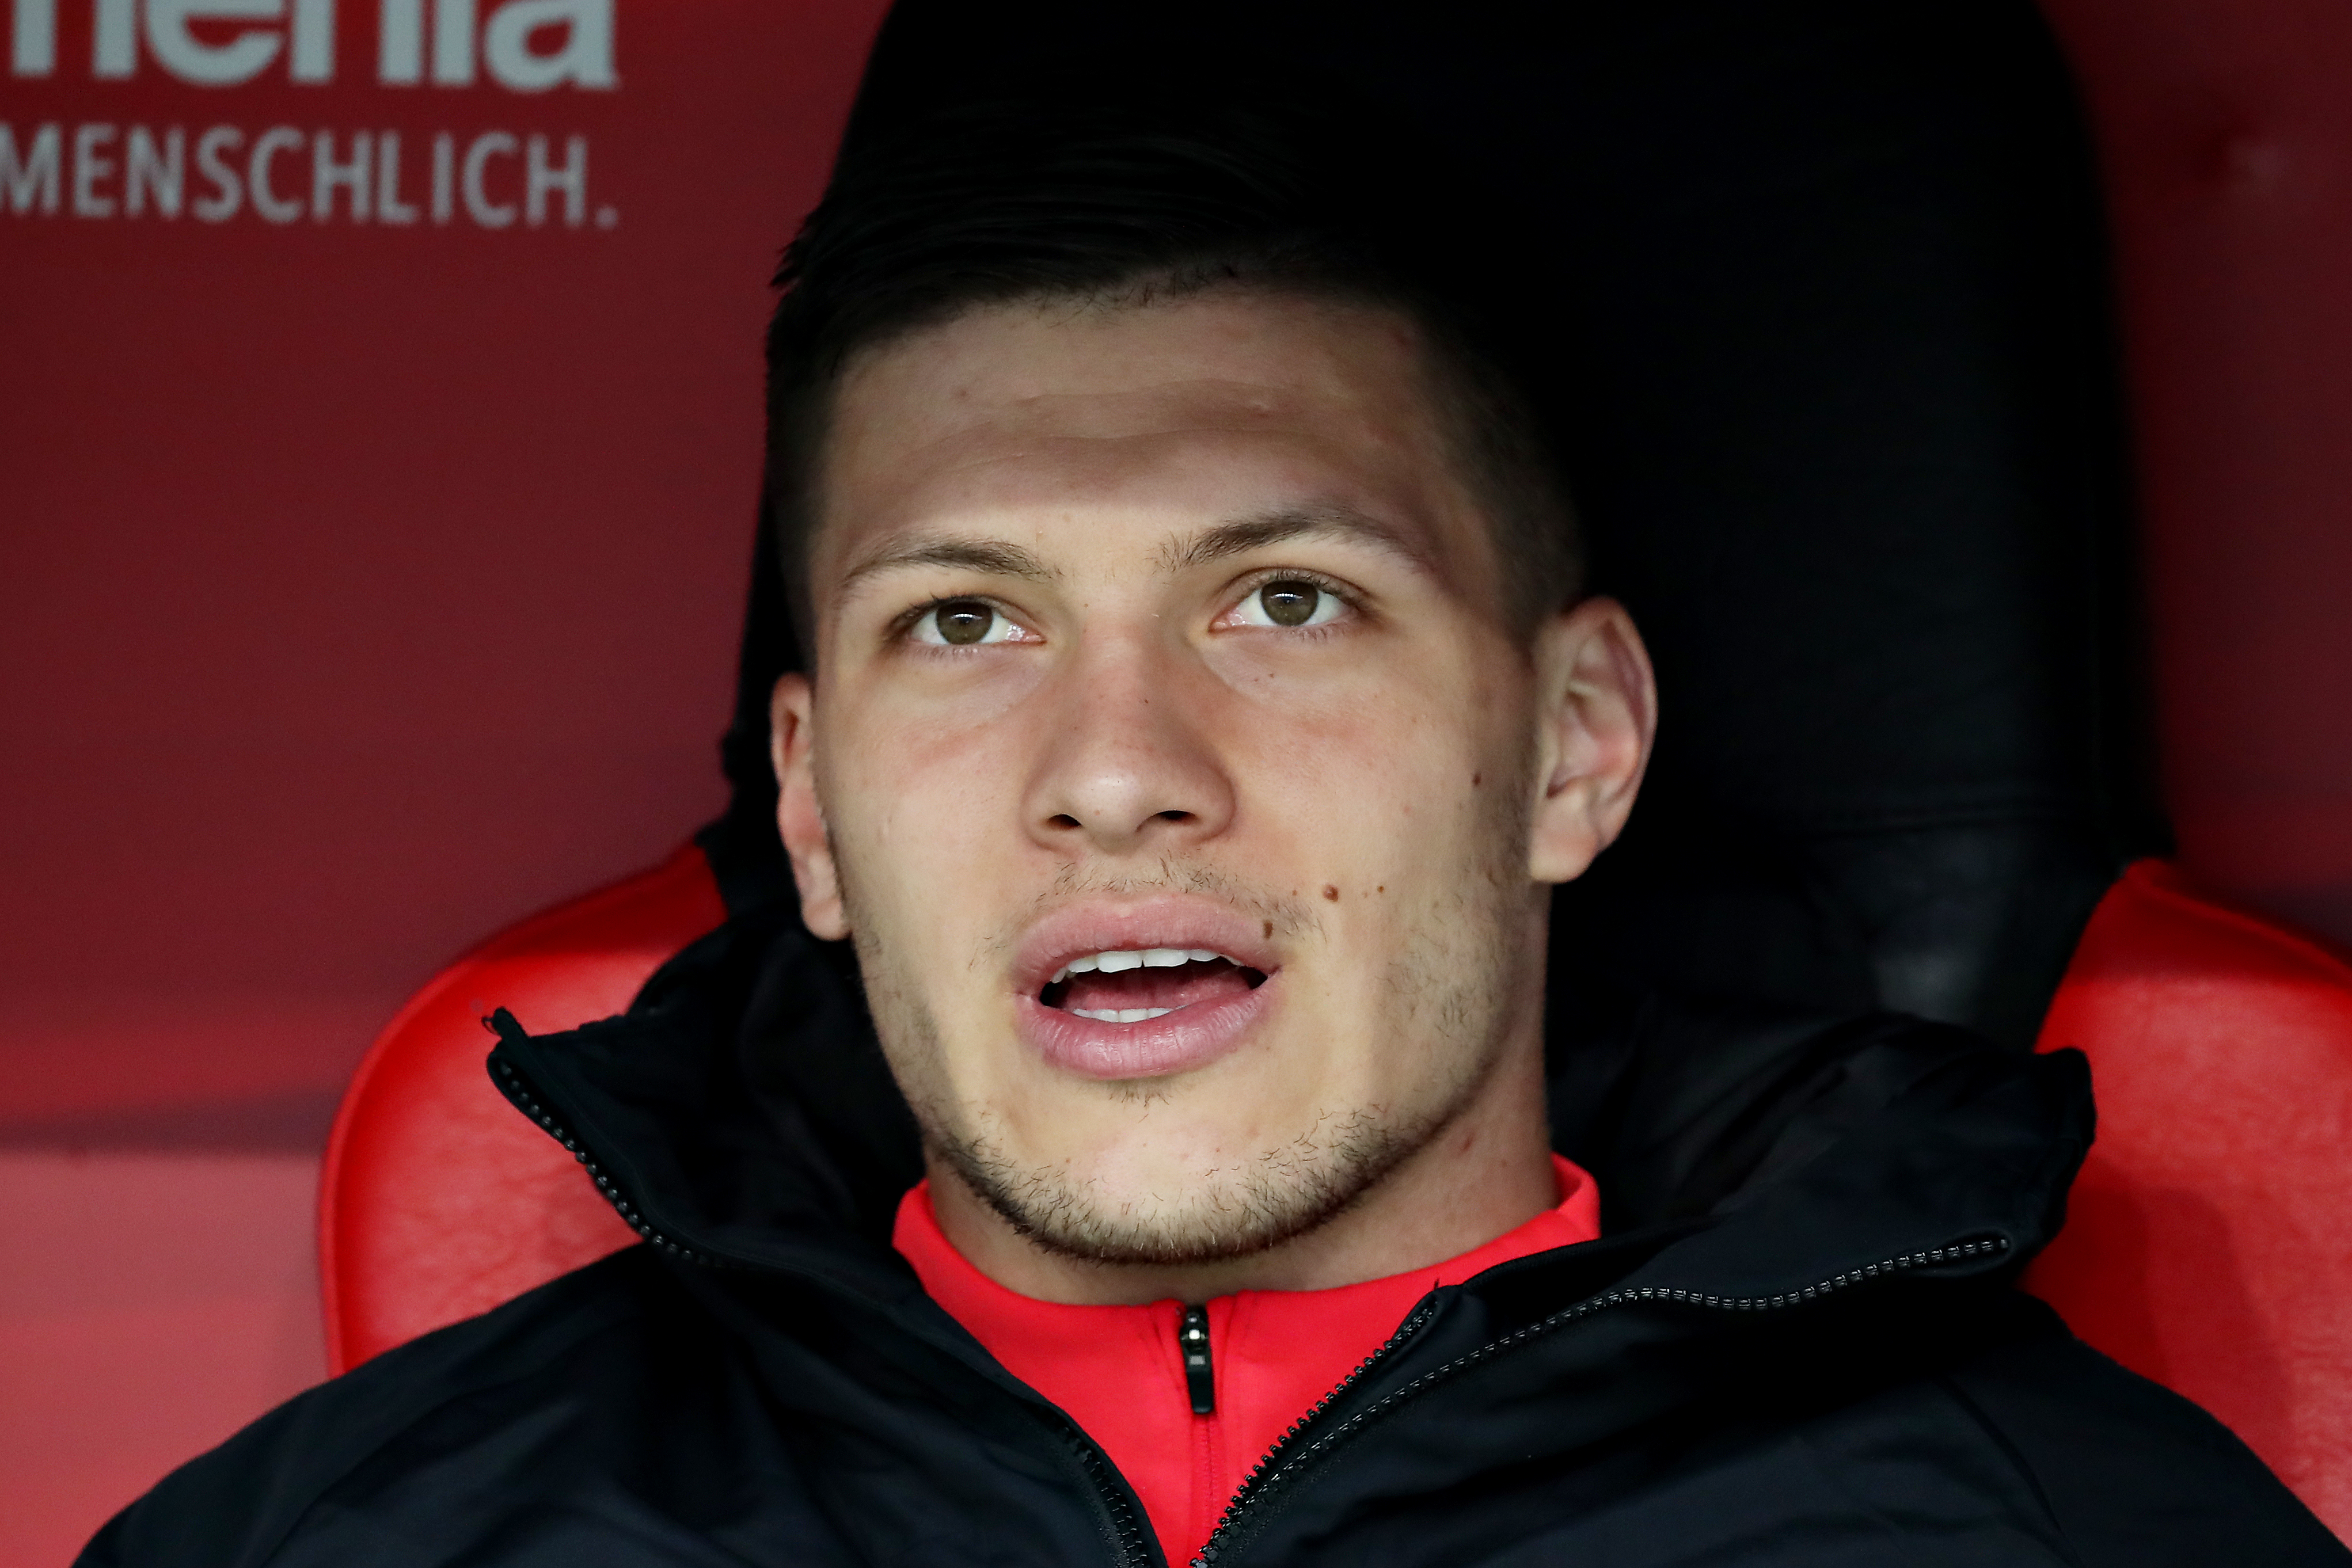 LEVERKUSEN, GERMANY - MAY 05: Luka Jovic of Eintracht Frankfurt looks on from the substitutes bench during the Bundesliga match between Bayer 04 Leverkusen and Eintracht Frankfurt at BayArena on May 05, 2019 in Leverkusen, Germany. (Photo by Christof Koepsel/Bongarts/Getty Images)